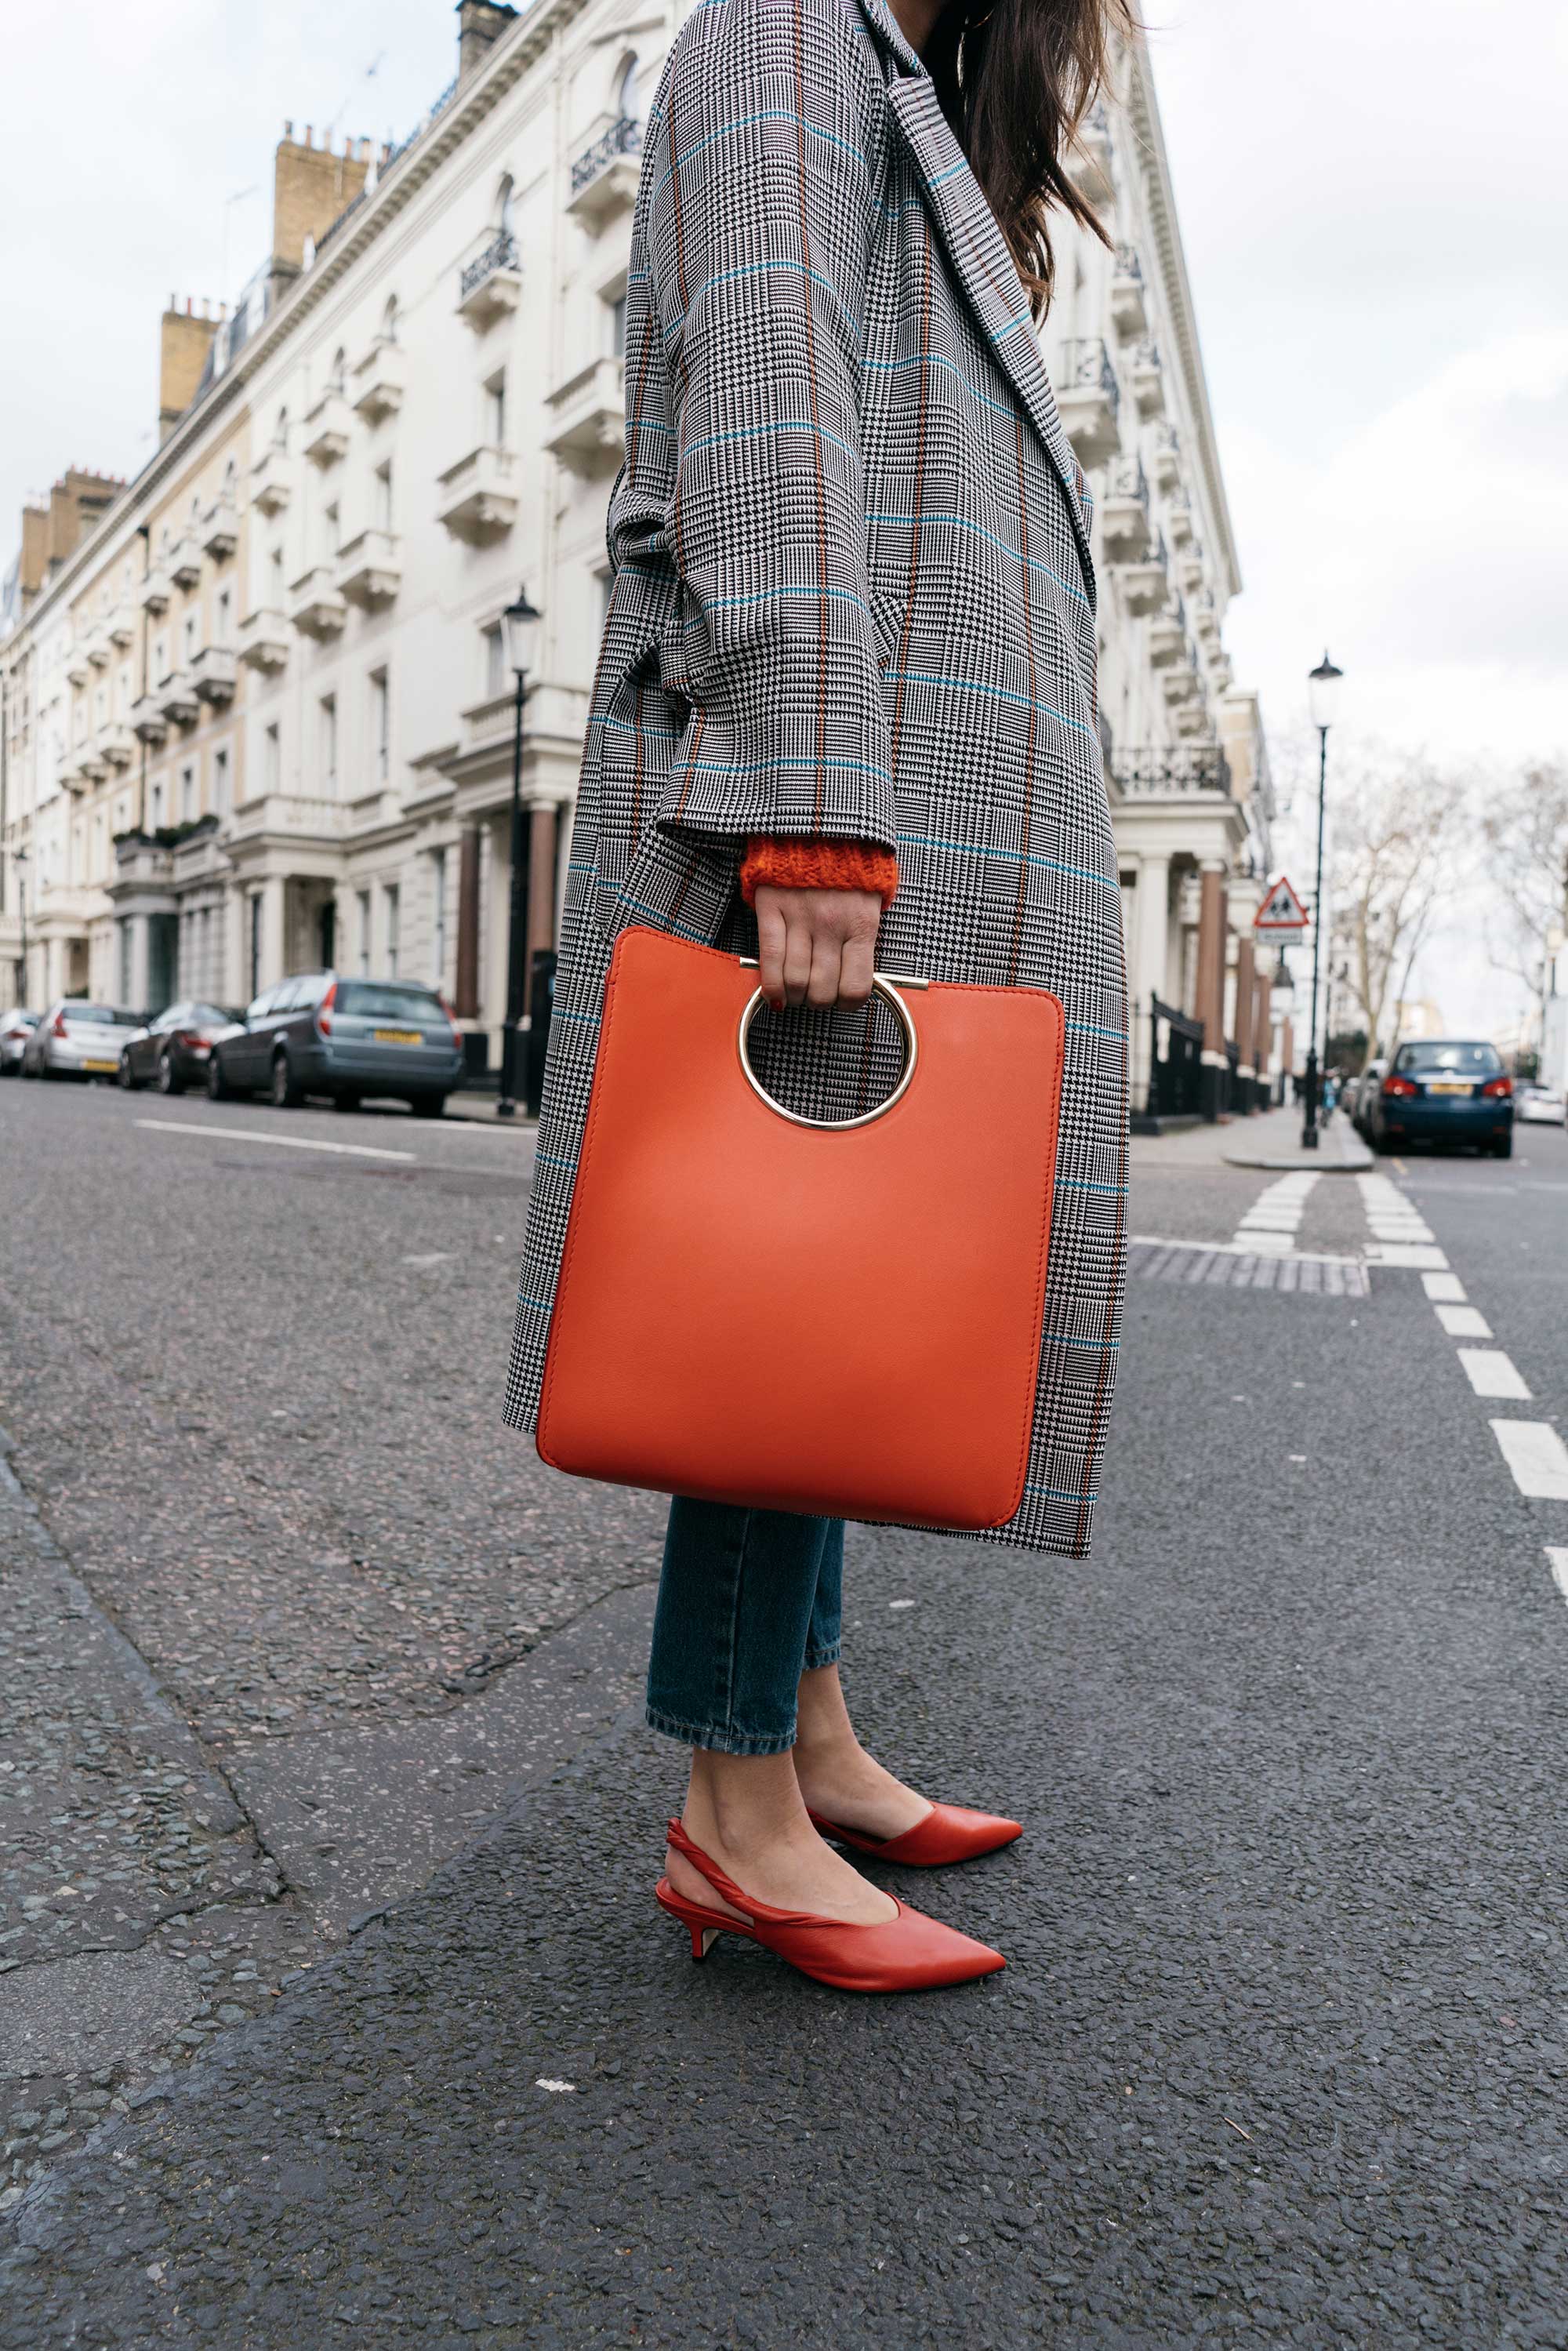 Lightweight-Check-Coat,-Salvatore-Ferragamo-Red-Leather-Tote,--Mom-jeans,-London-Fall-Outfit-Red-Accessories-10.jpg